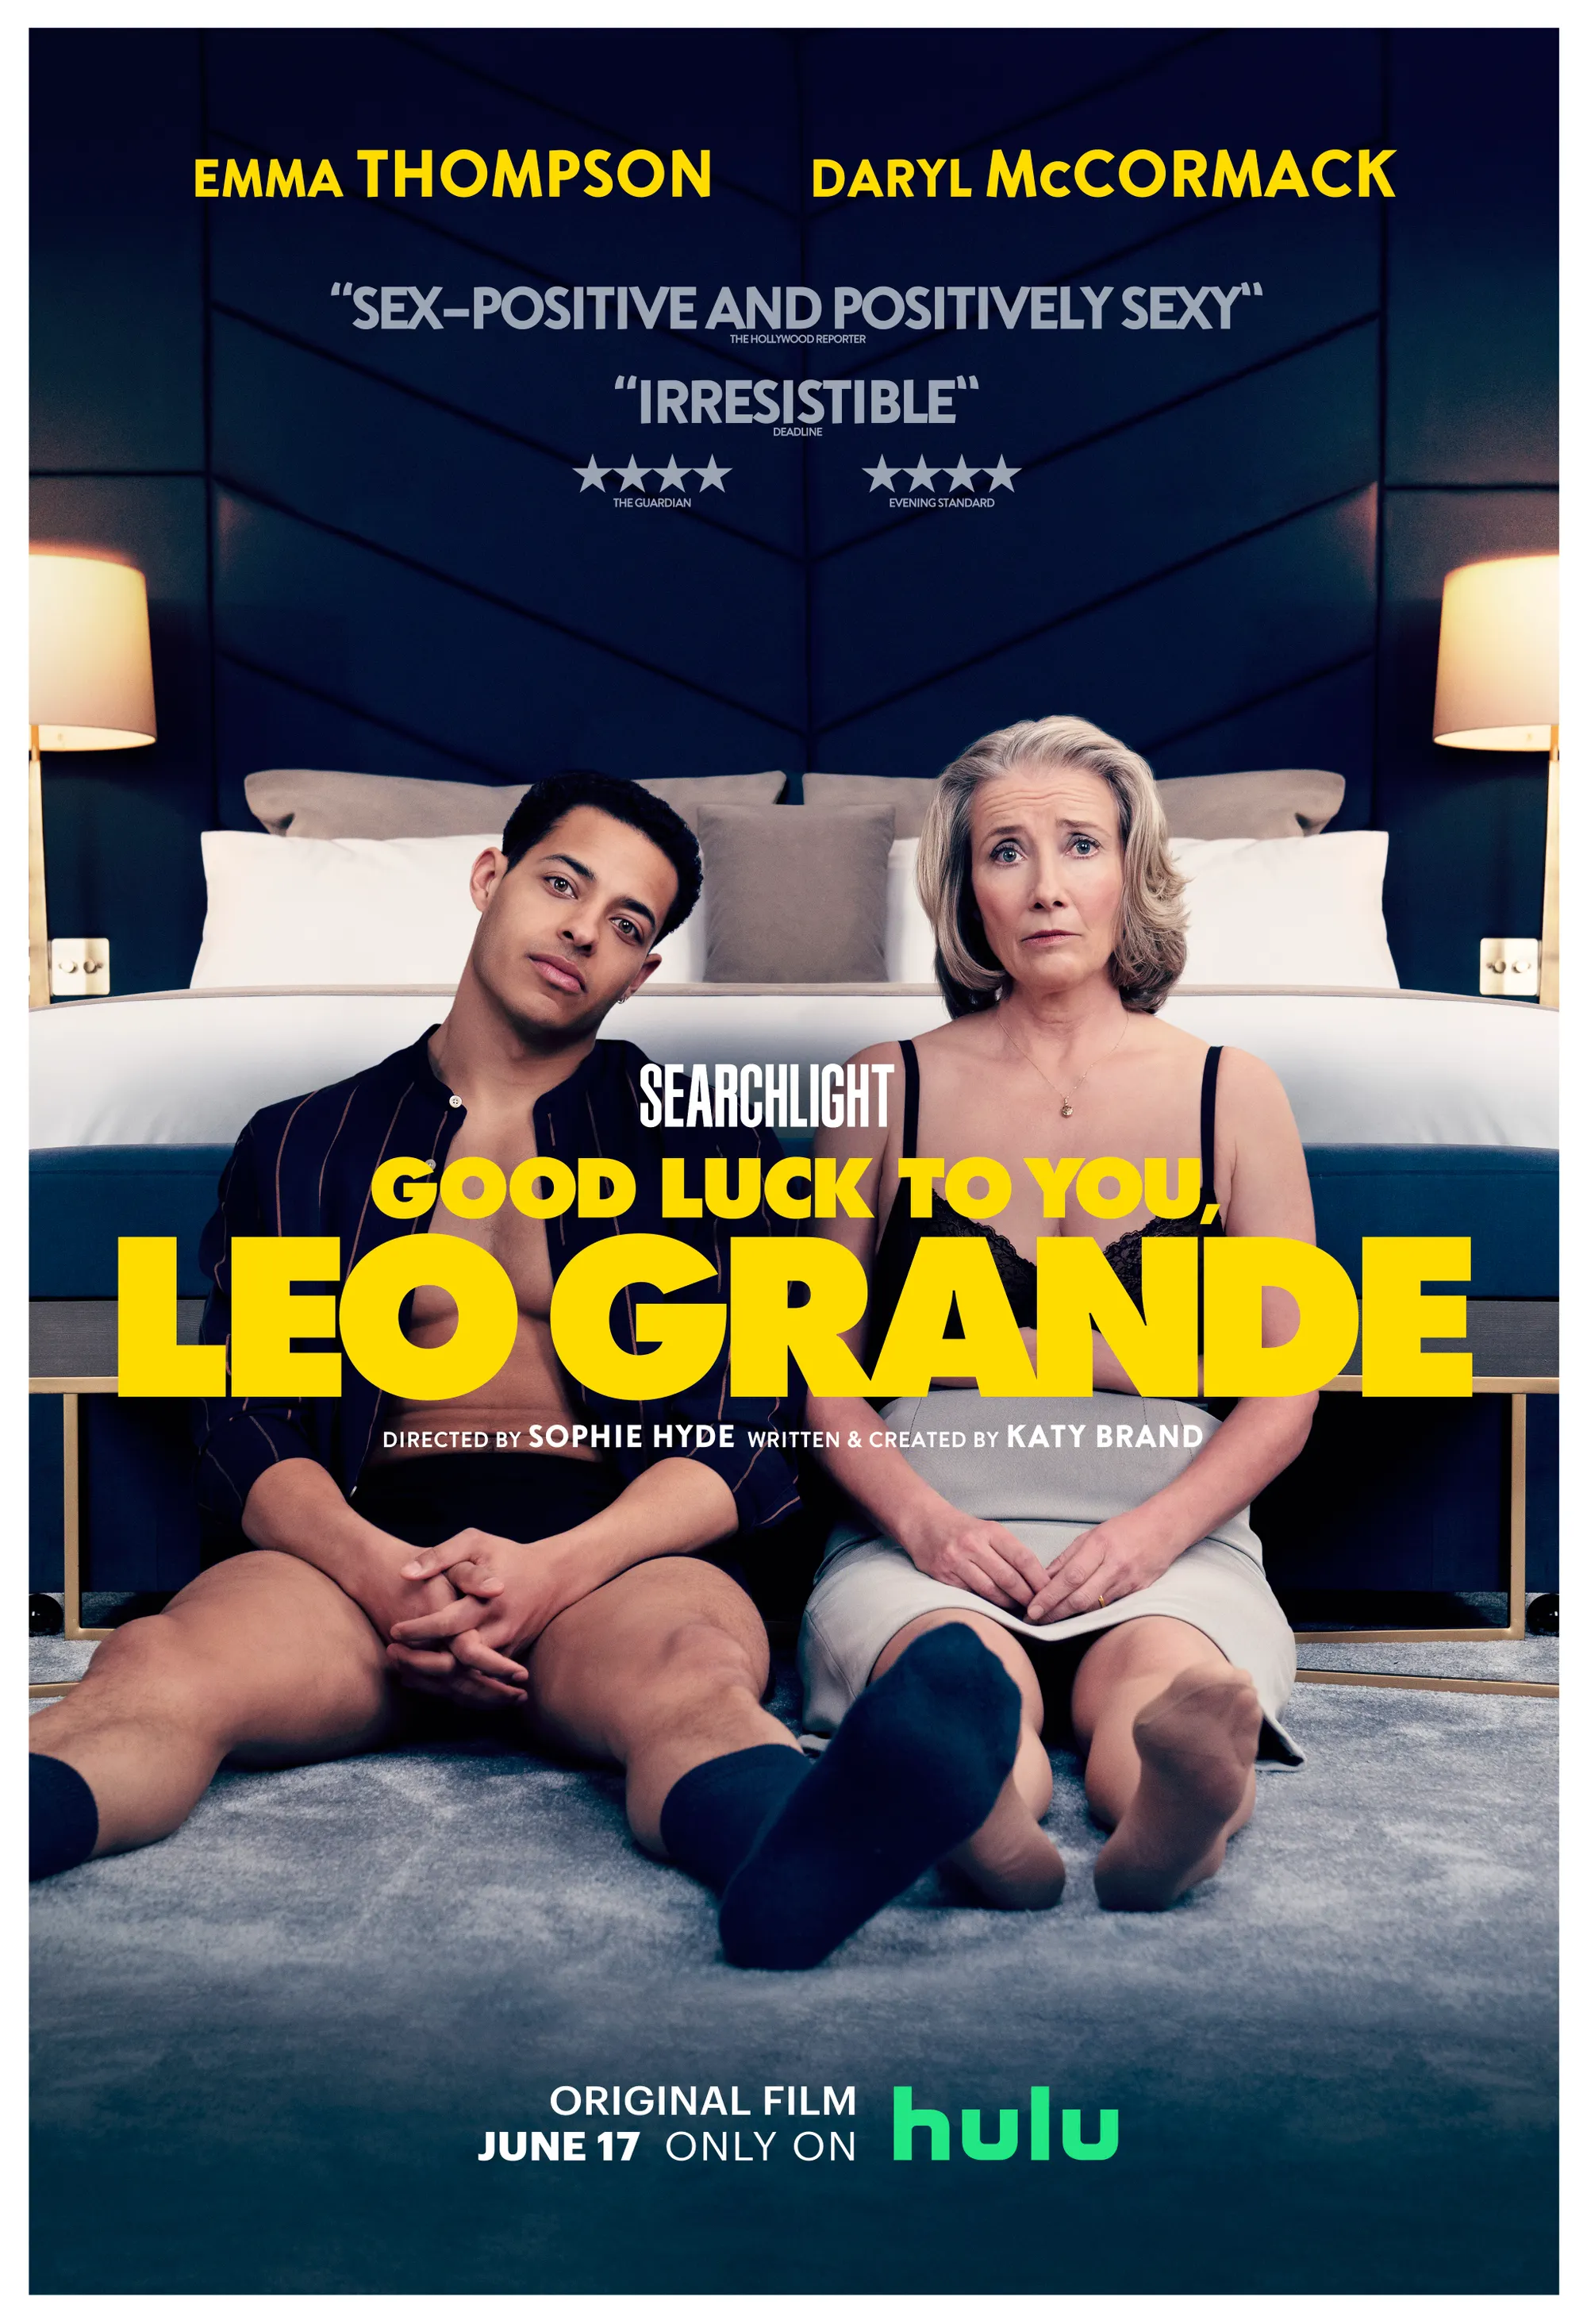 Good Luck to You, Leo Grande Poster.